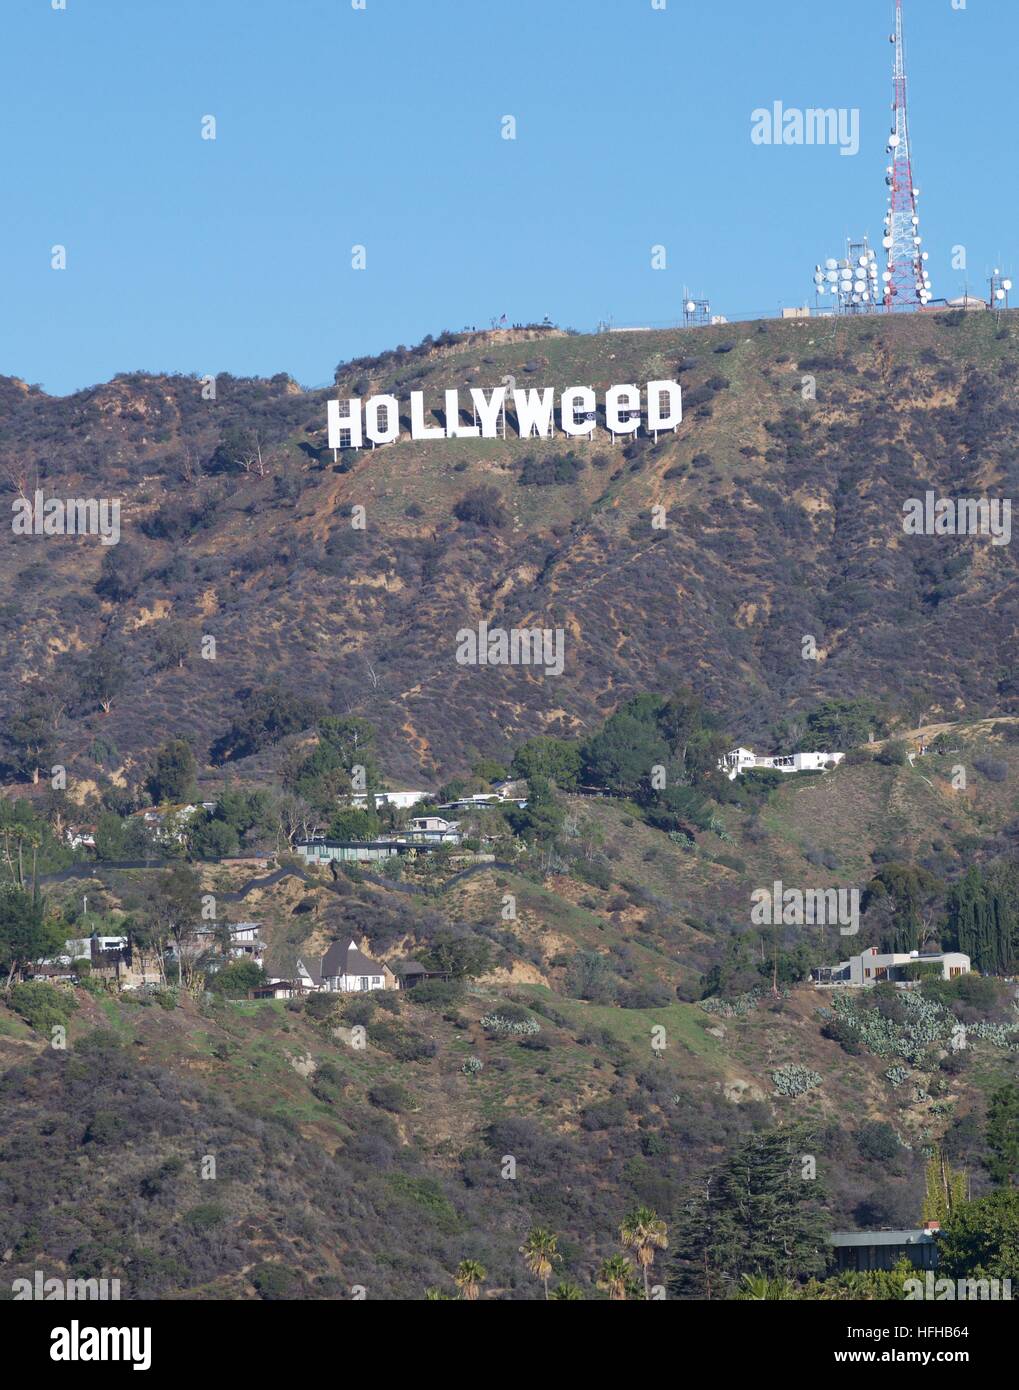 Hollywood, California, USA. 01st Jan, 2017. New Years pranksters, perhaps inspired by the passing of legalized marijuana laws in California, used cleverly placed material on the iconic Hollywood sign to make it read 'Hollyweed' © Edward Nachtrieb/Alamy Live News Stock Photo